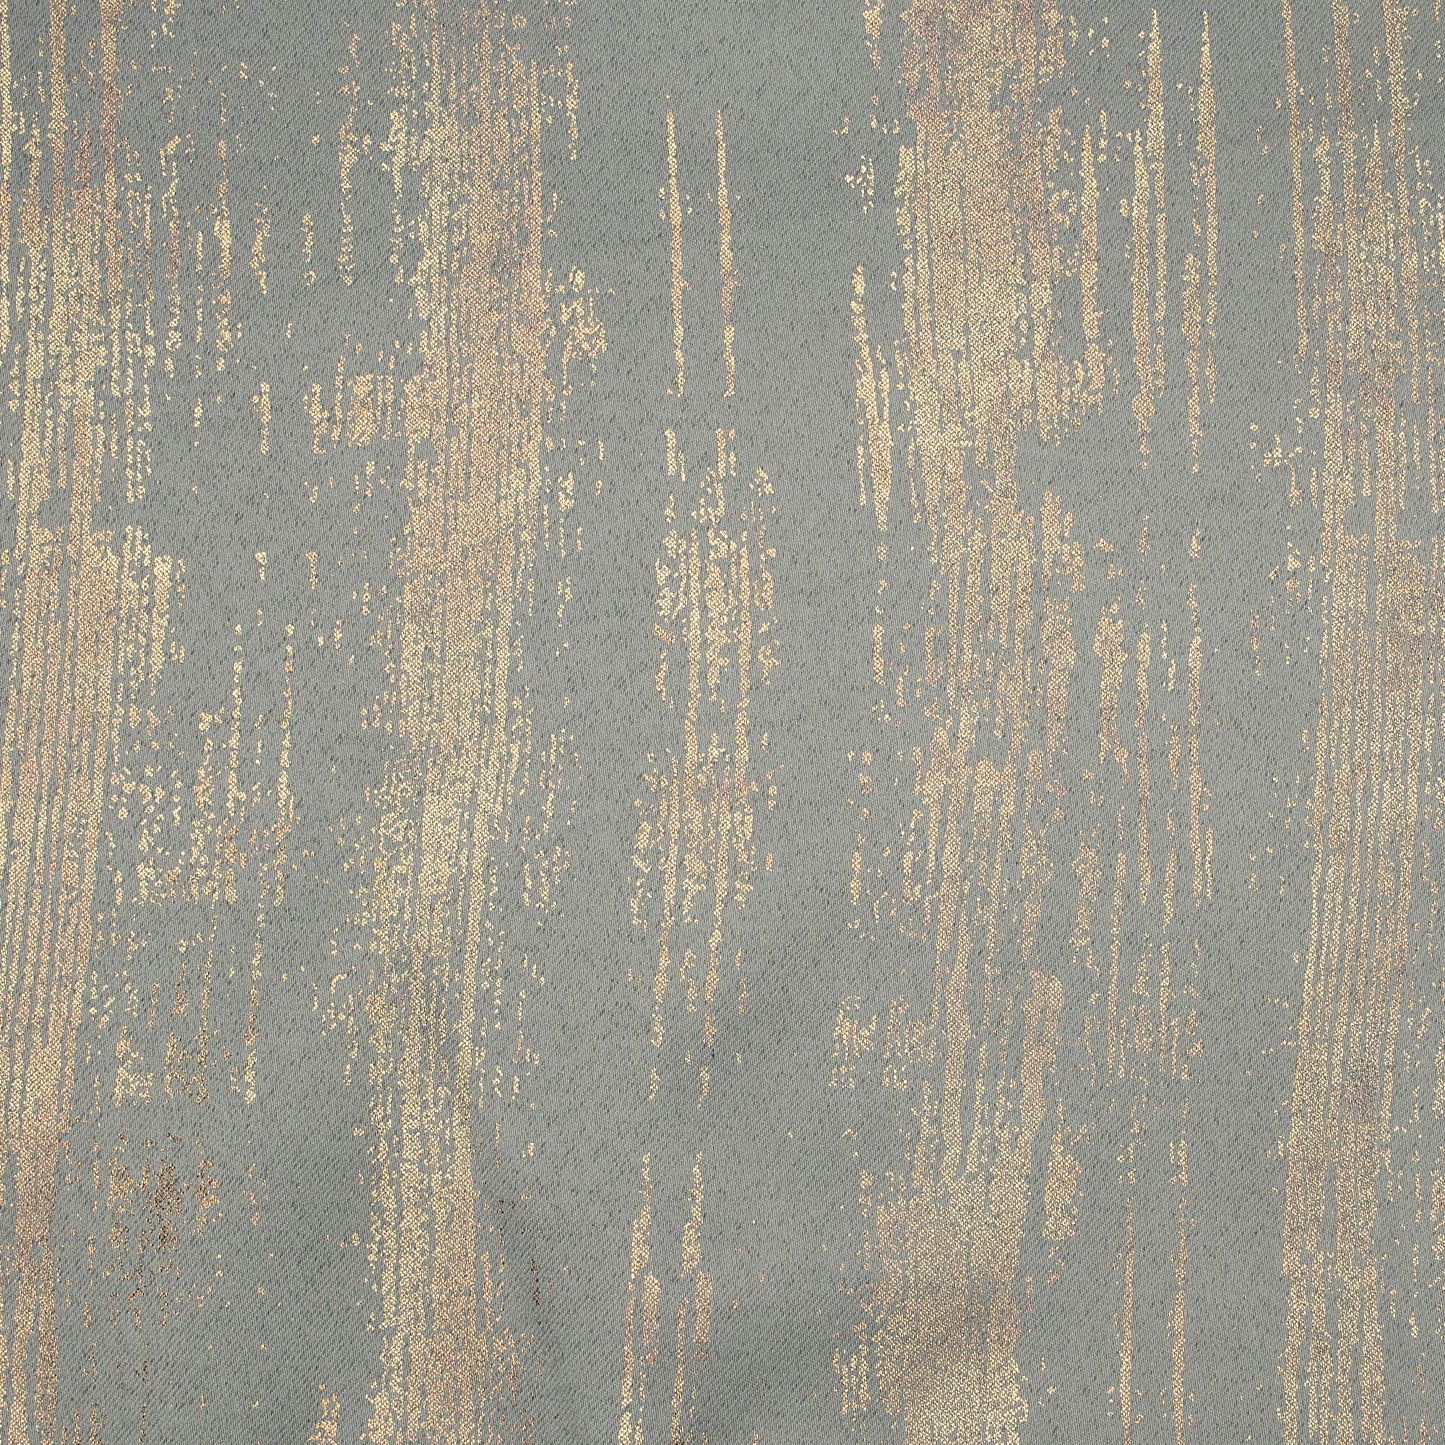 Lead Grey Texture Pattern Golden Foil Premium Curtain Fabric (Width 54 Inches)